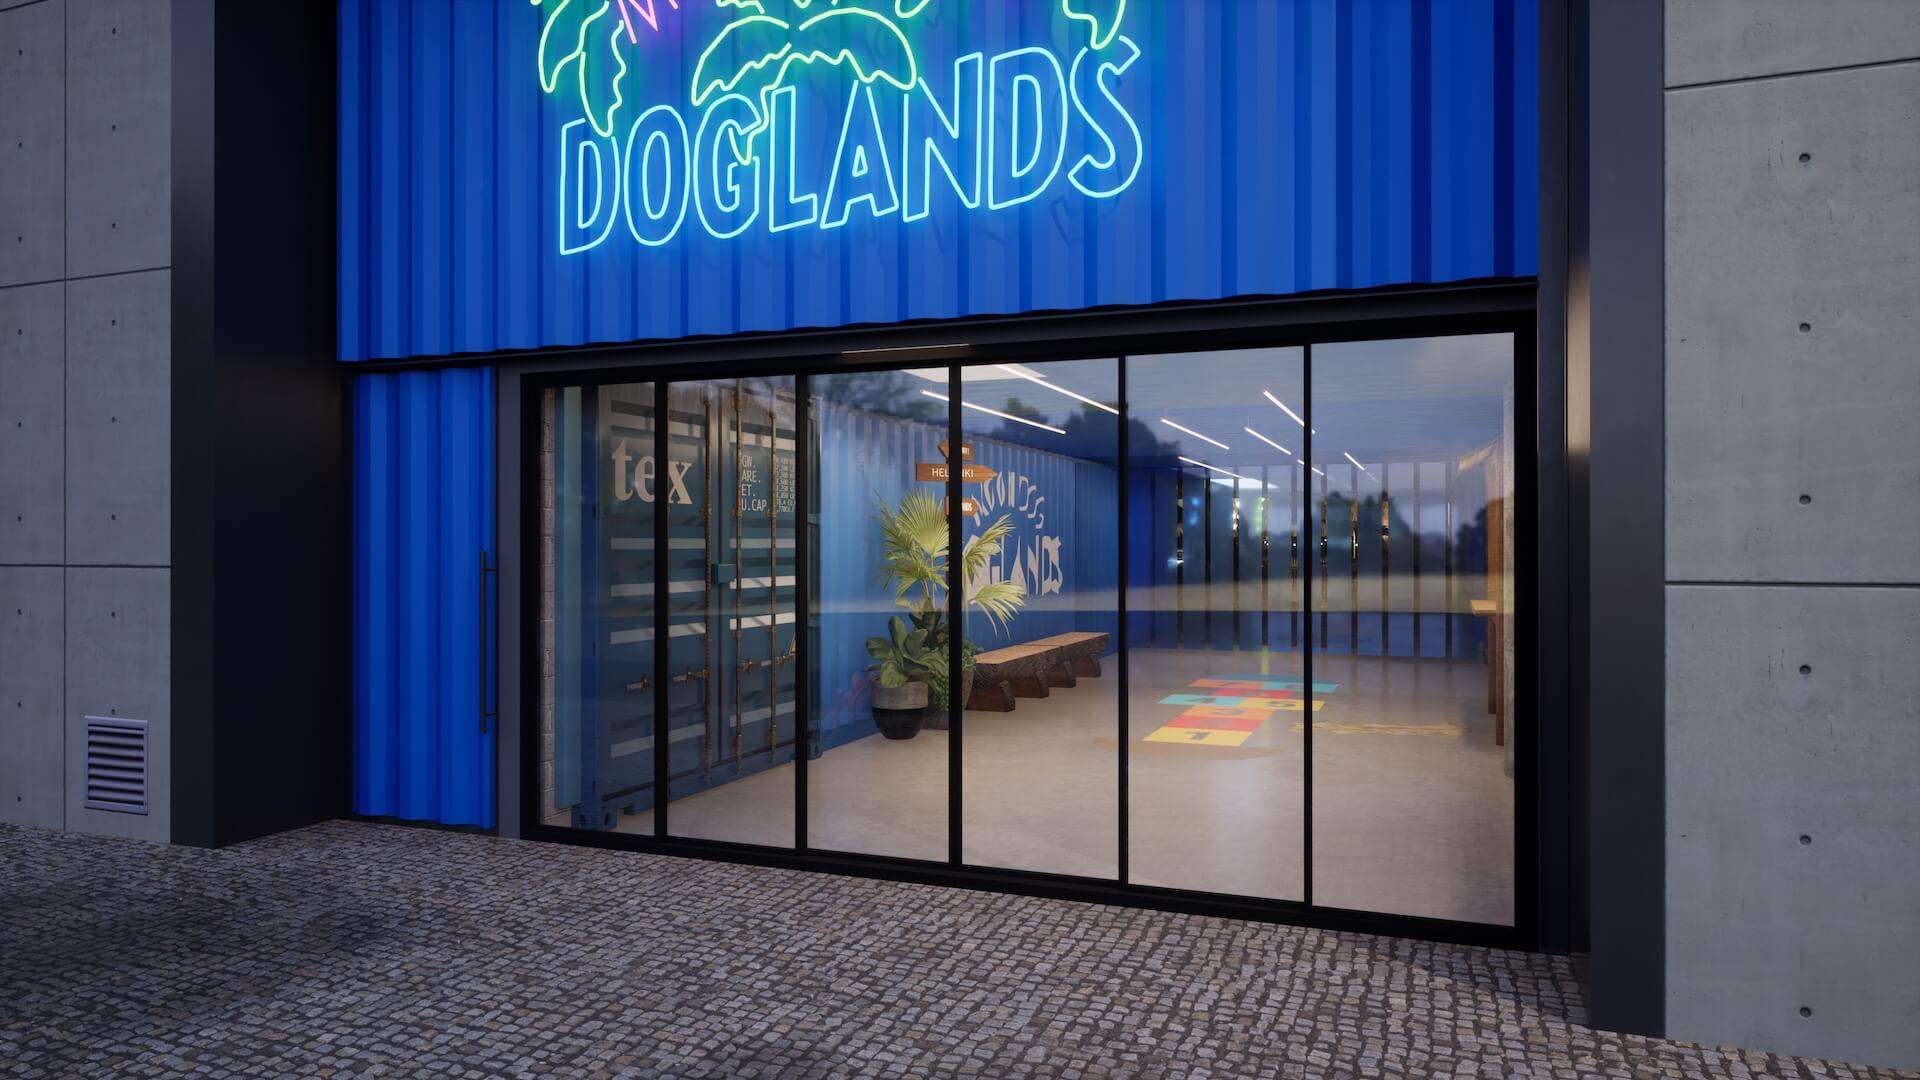 Moon Dog's brewery bar in Docklands - Doglands